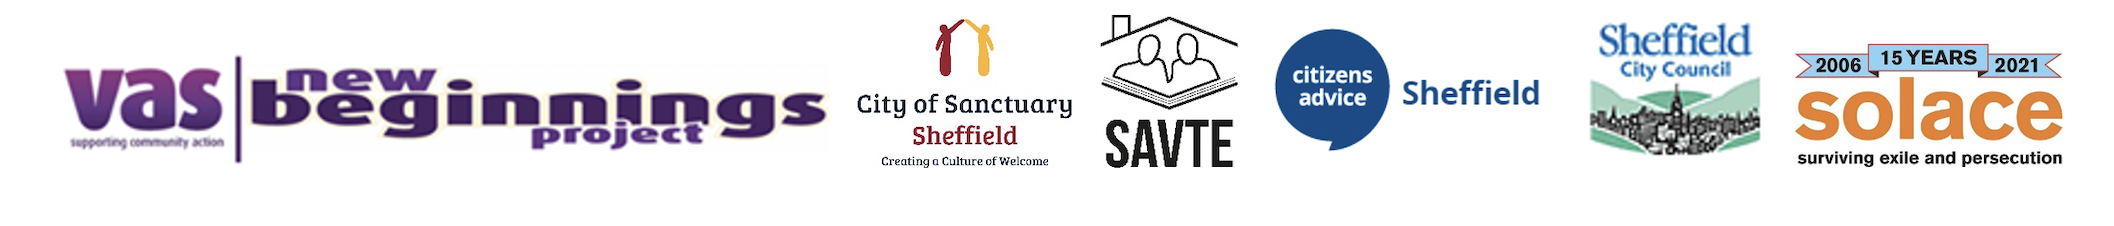 A series of logos for the VAS new beginnings project, City of Sanctuary Sheffield, SAVTE, Citizens Advice Sheffield, Sheffield City Council, and Solace.